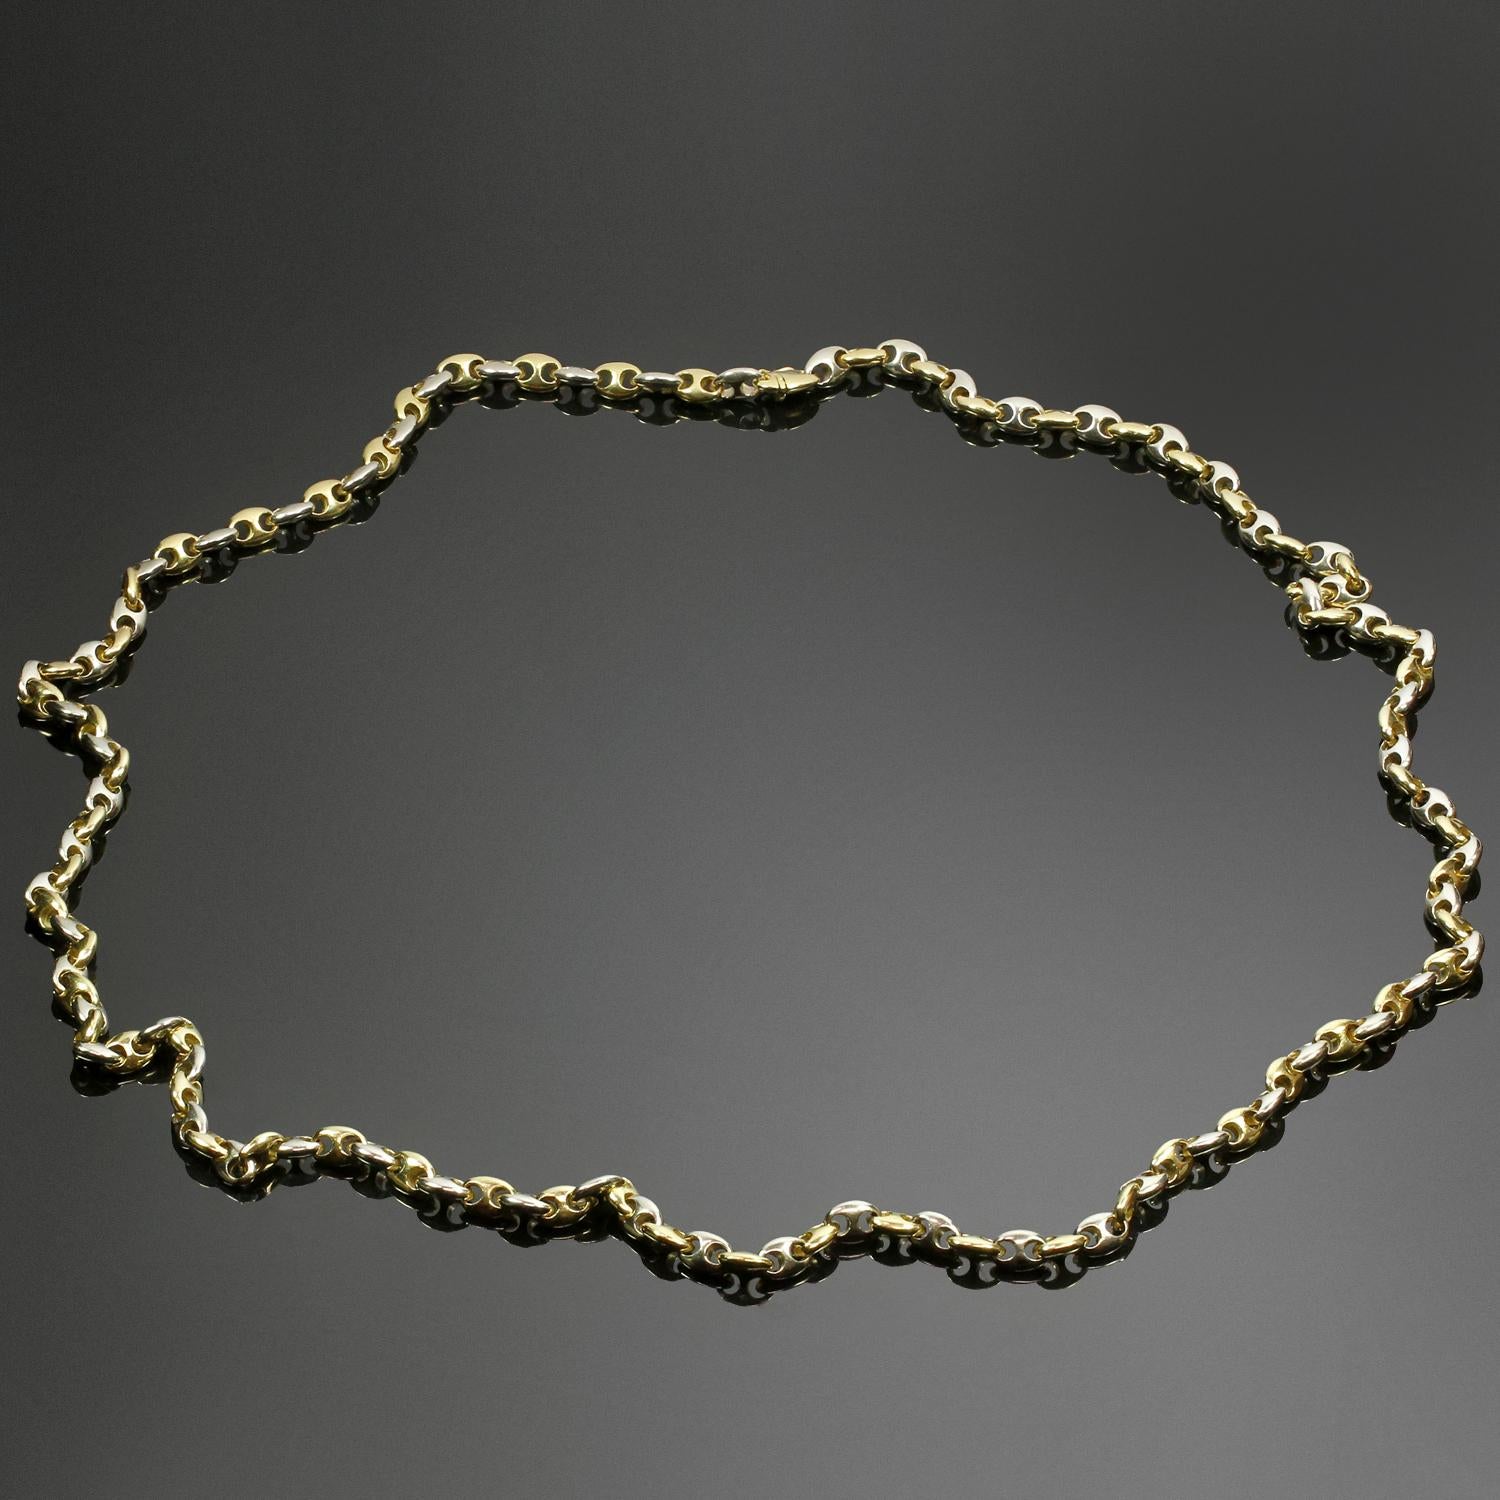 This chic unisex Cartier necklace features a long chain of mariner links crafted in 18k white and yellow gold. Circa 1990s. Measurements: 0.27